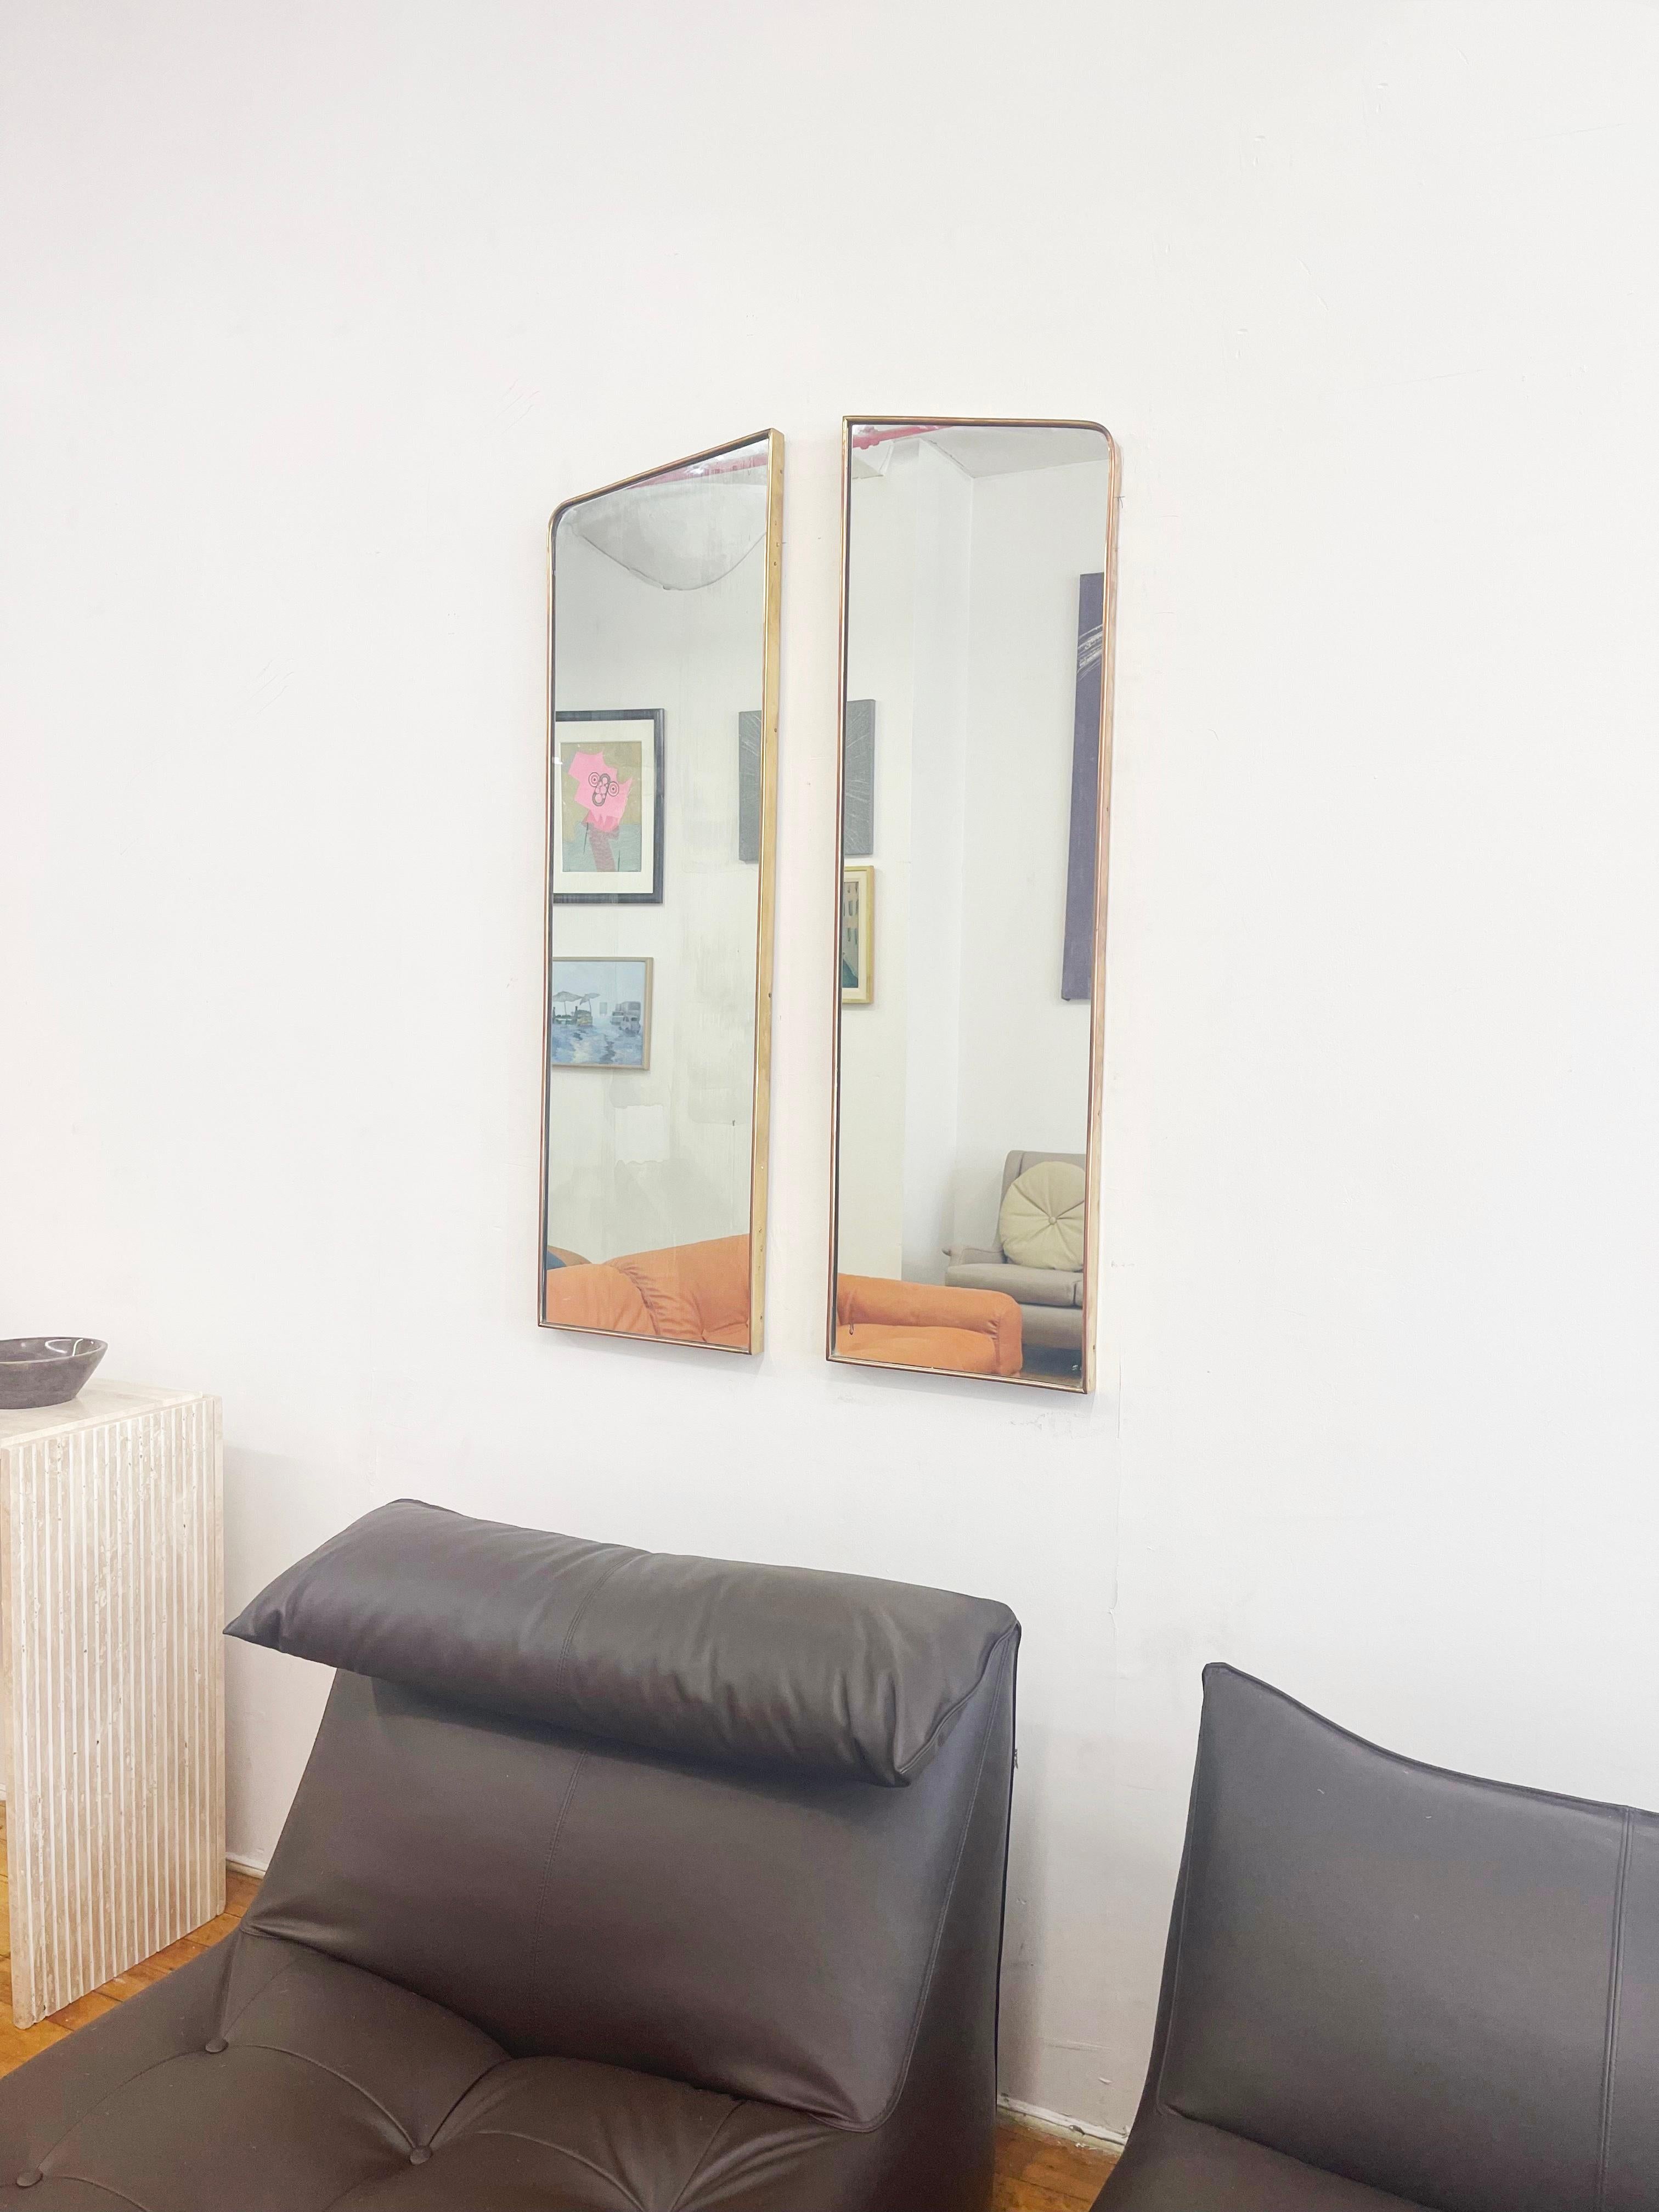 Introducing a stunning duo of Italian Vintage Brass Frame Mirrors, exuding a sleek and towering presence that instantly captivates. These mirrors are masterfully crafted with symmetrical shapes, designed to be used in perfect harmony as a